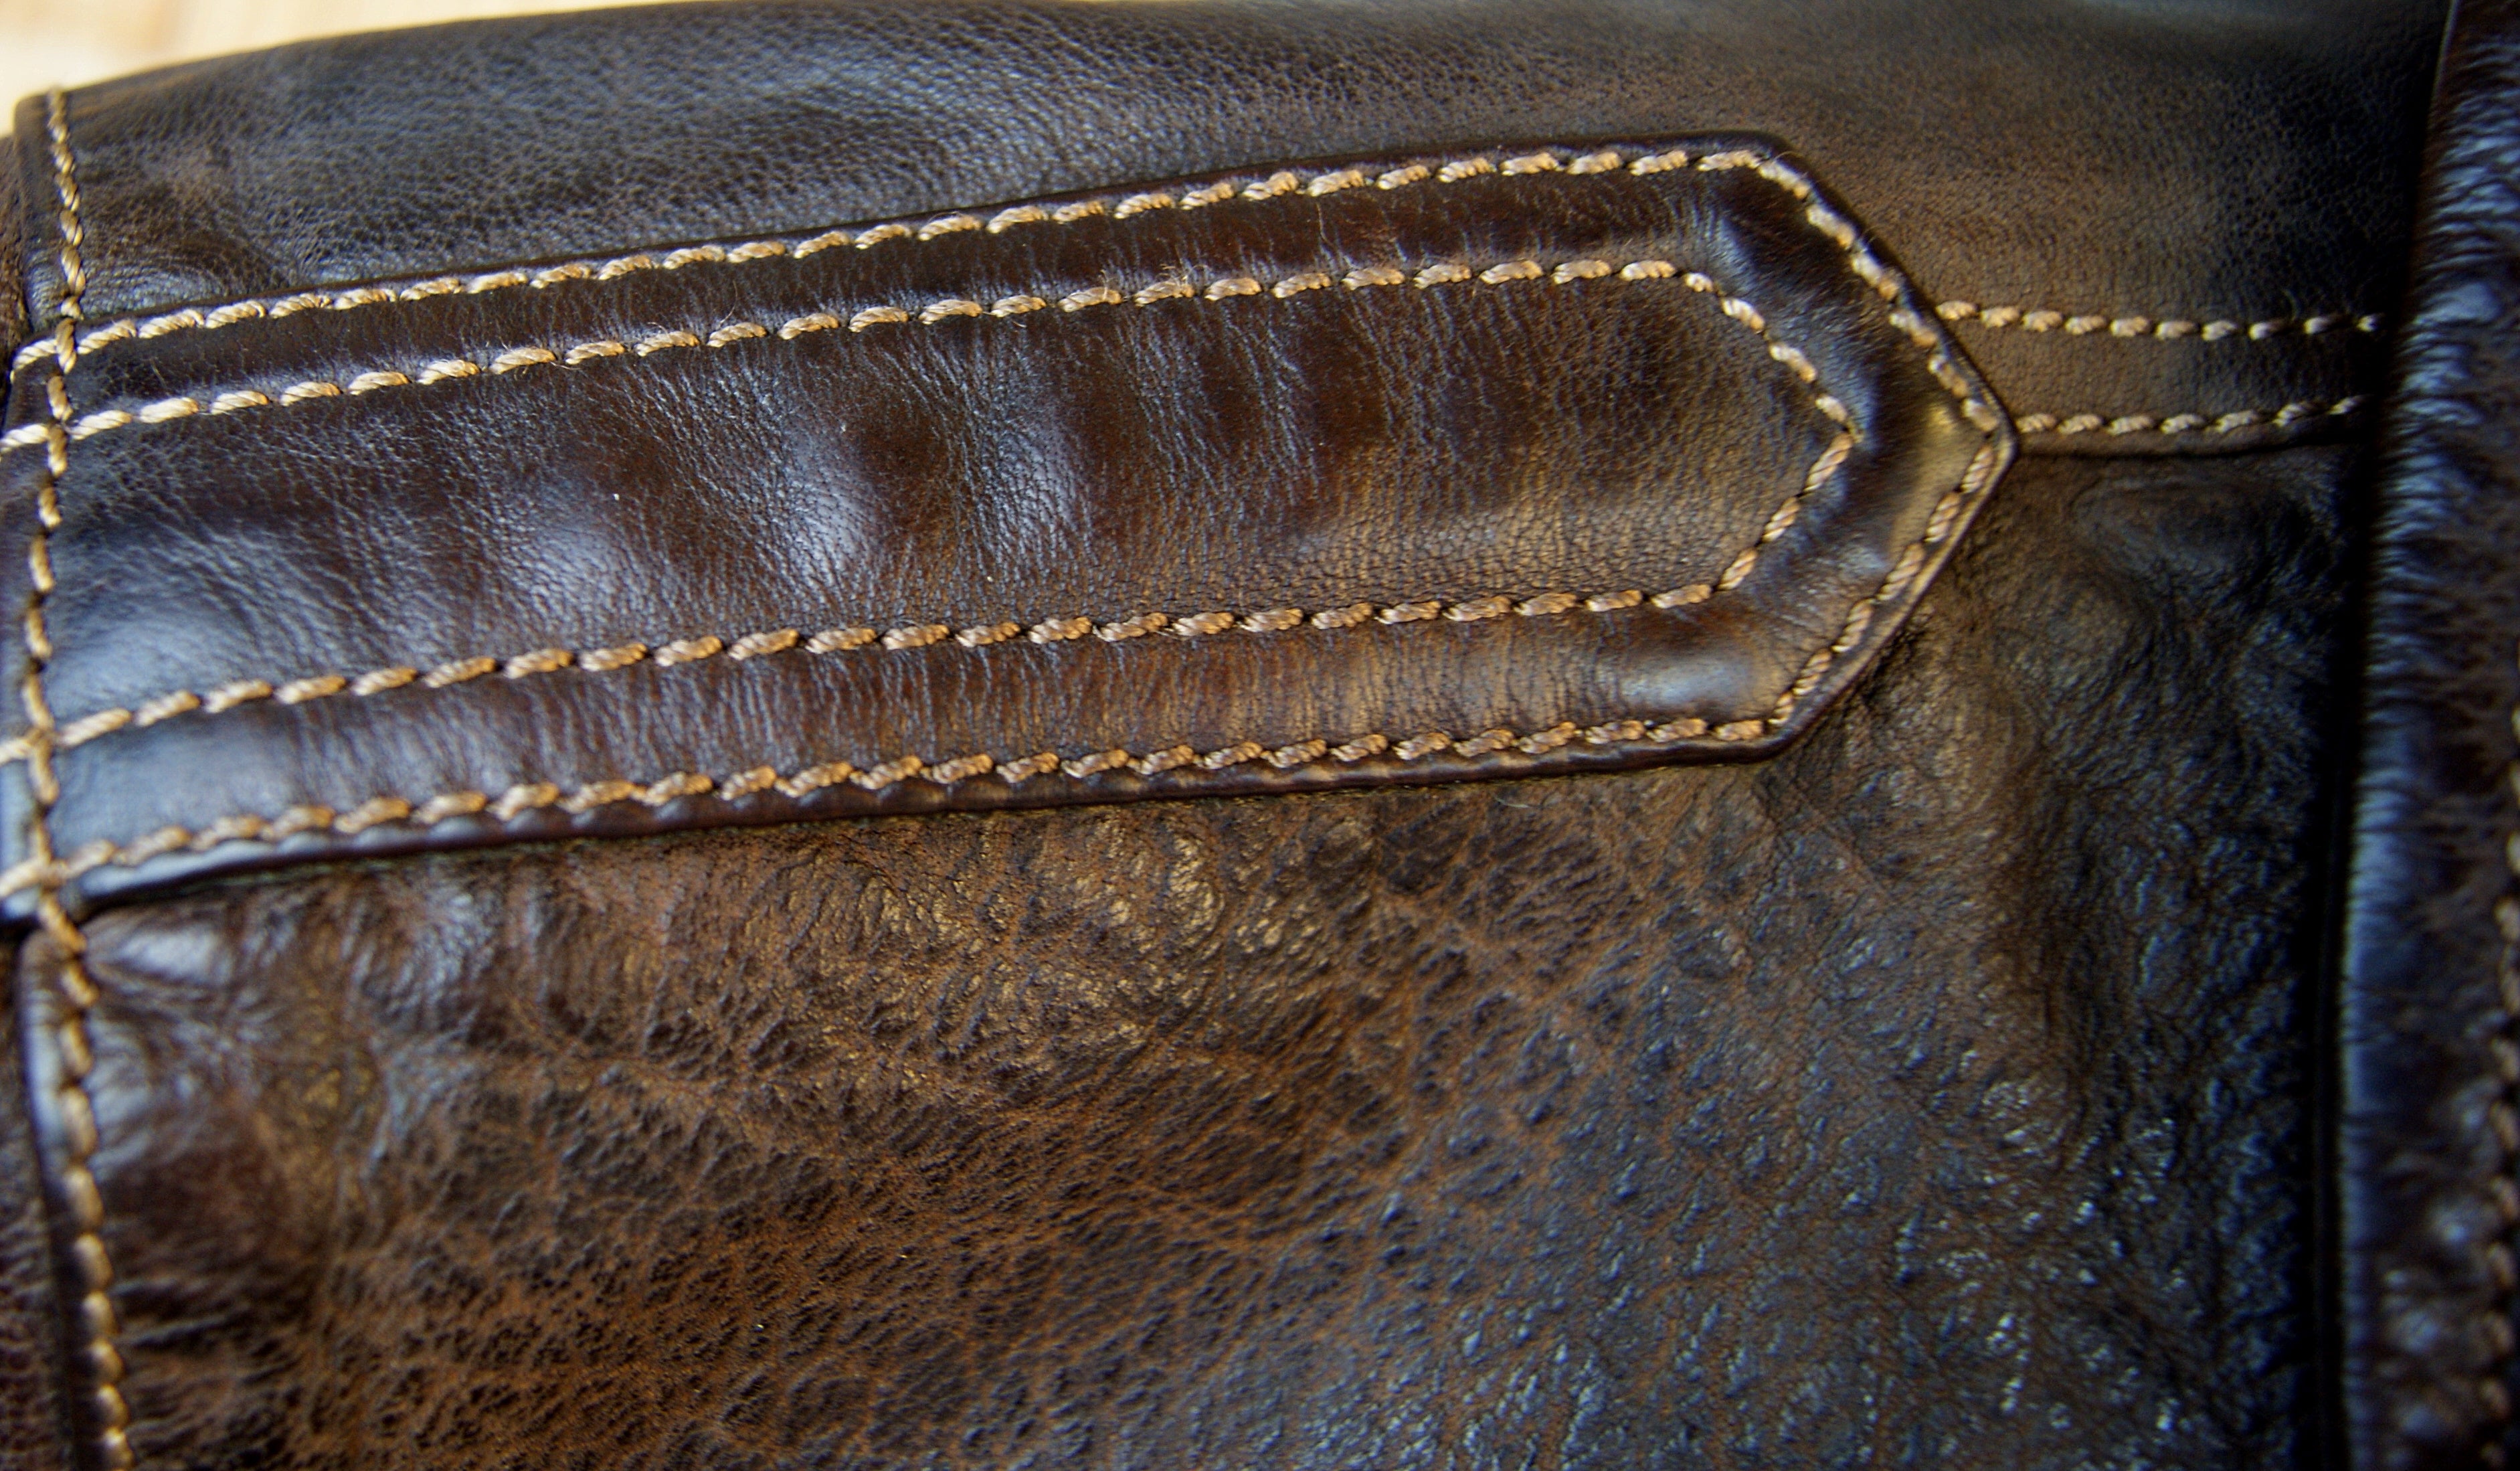 Thedi Atlas Deluxe Half Belt, size Large, Hand Dyed Cocoa Buffalo